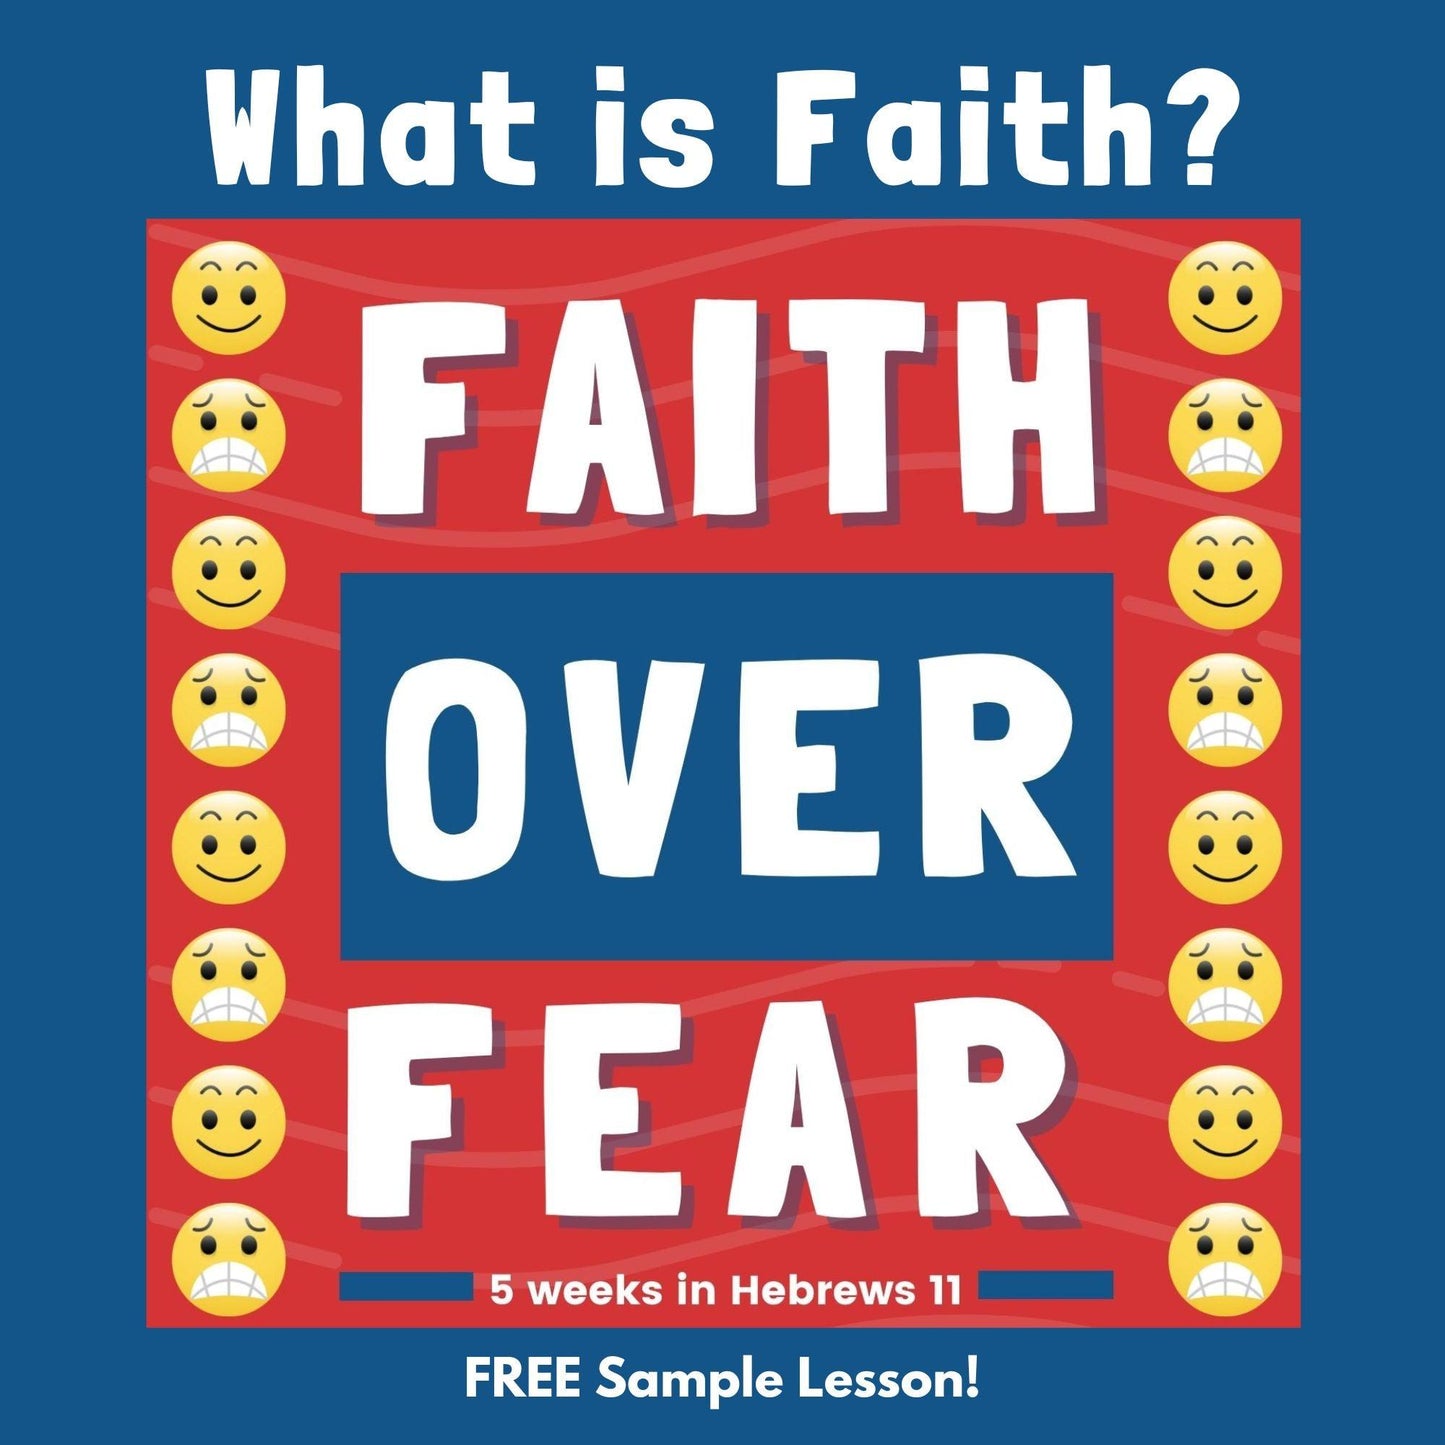 "Faith Over Fear" Free Sample Lesson (download only) - Sunday School Store 